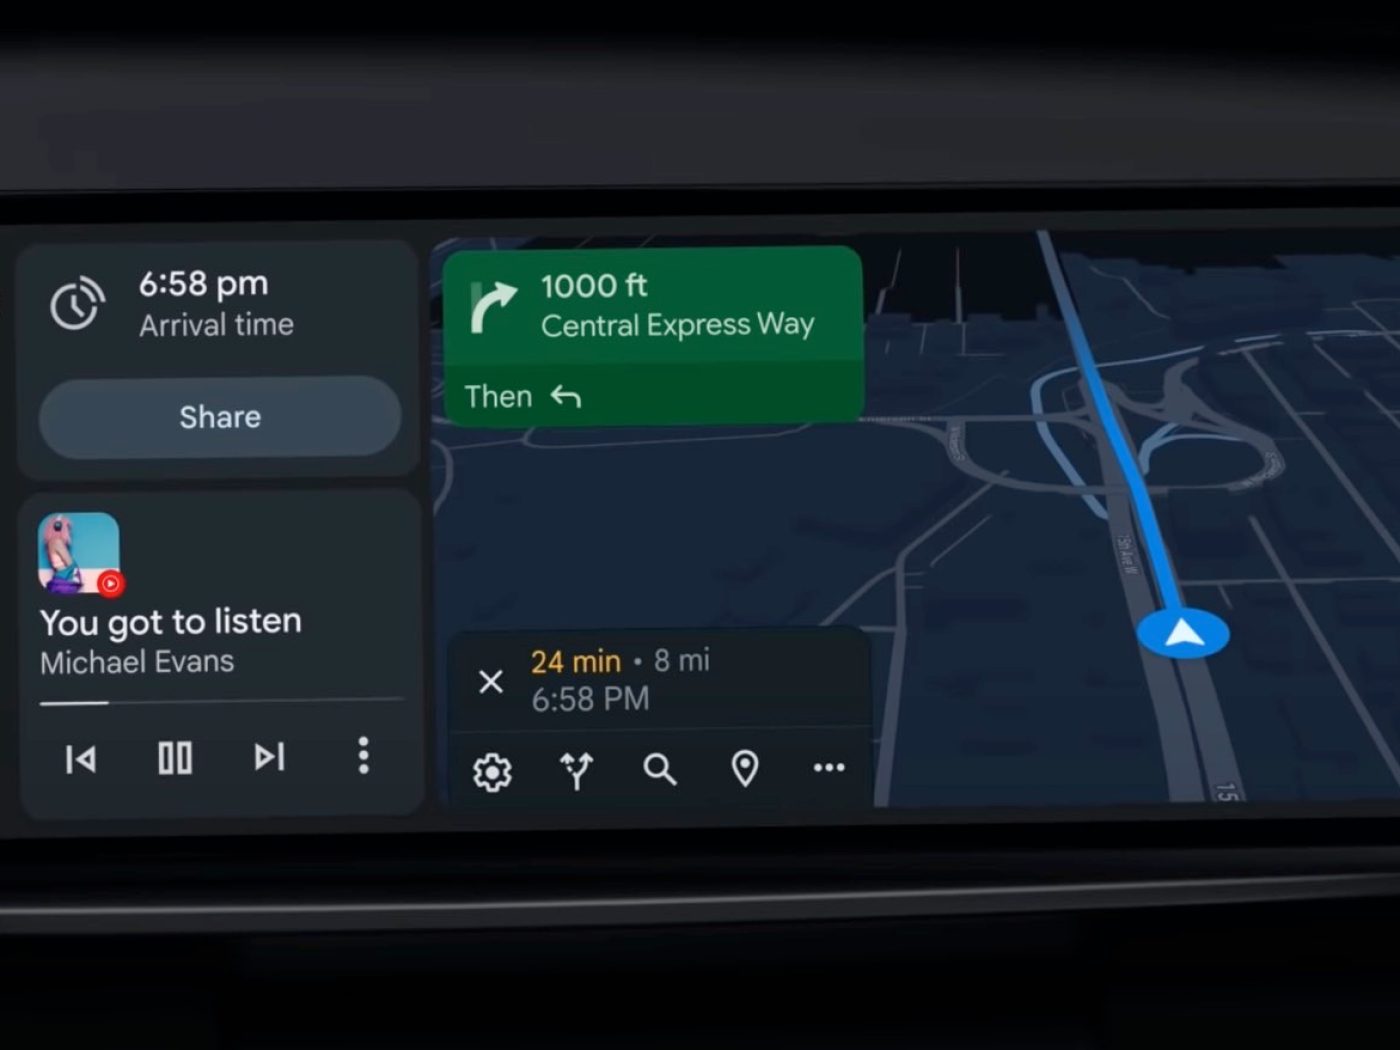 Android Auto split-screen display design makeover is coming soon